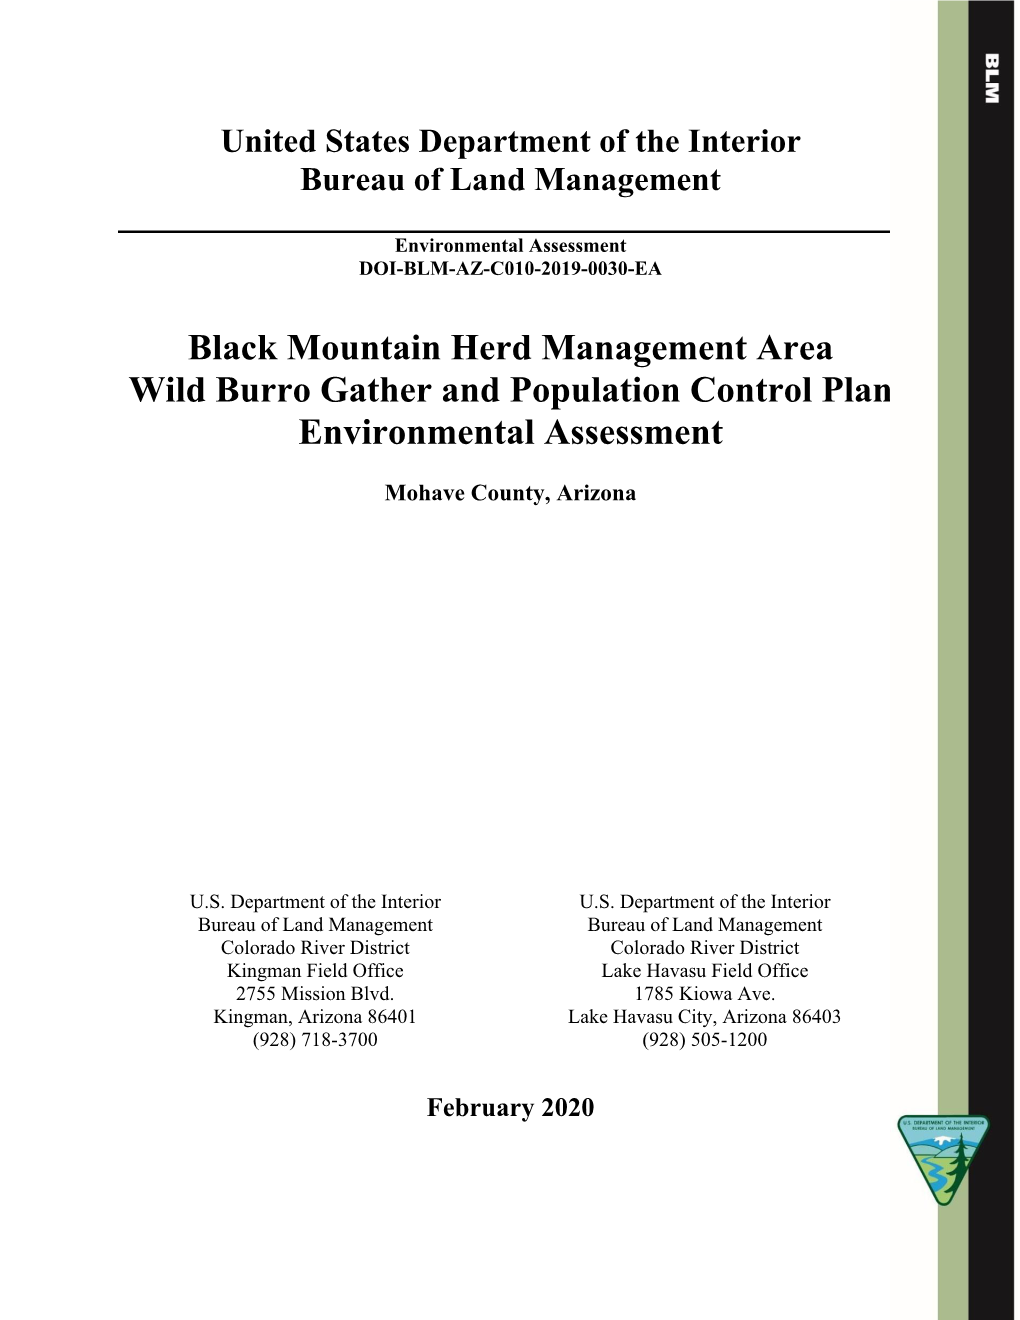 Black Mountain Herd Management Area Wild Burro Gather and Population Control Plan Environmental Assessment